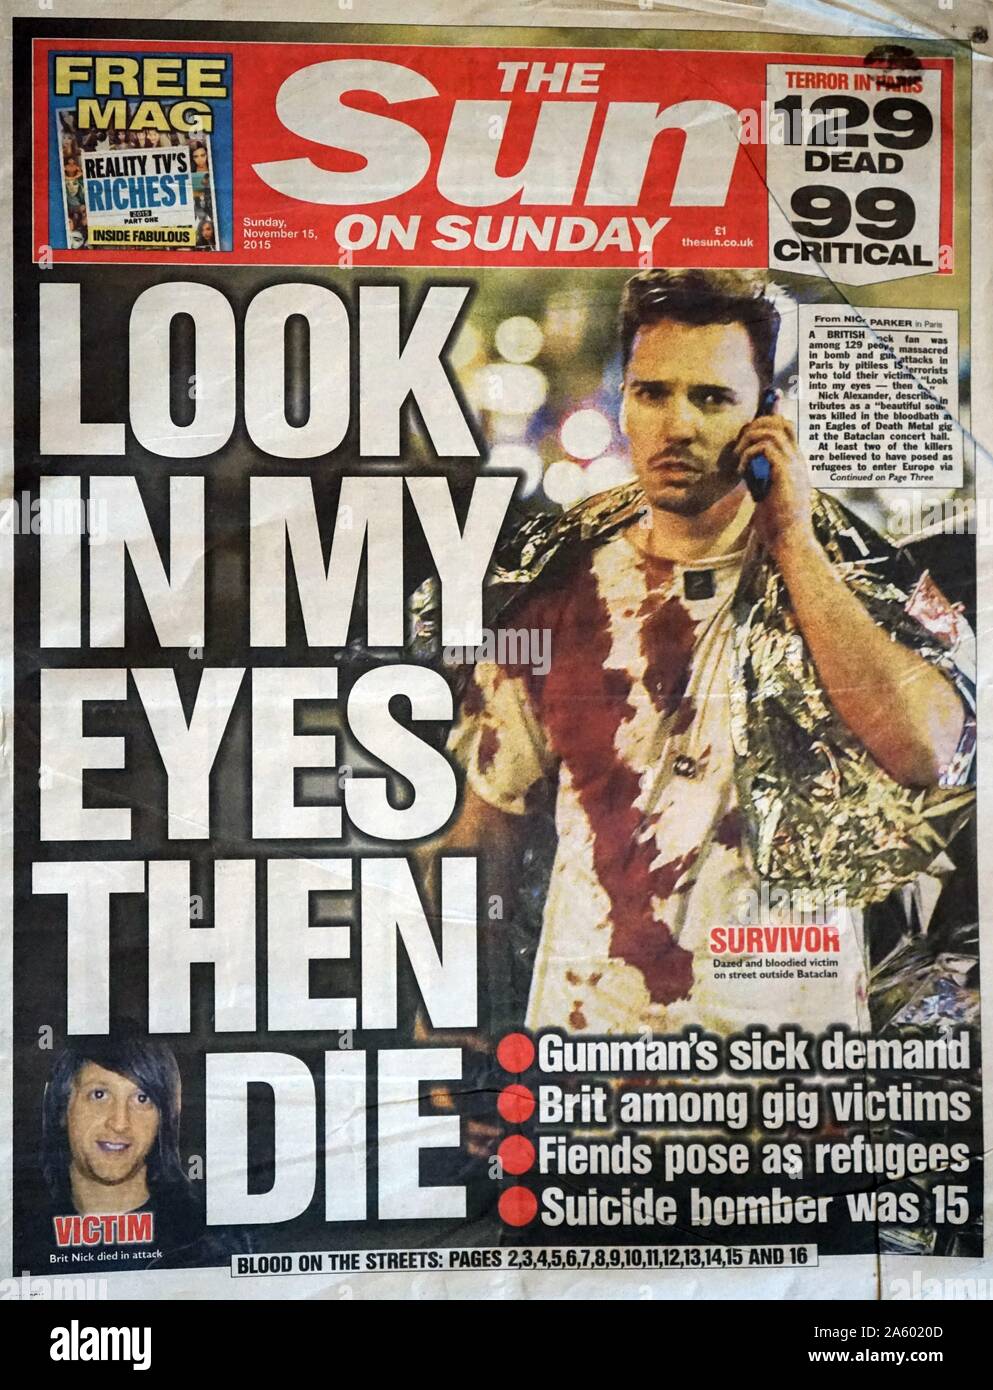 The Sun, front page, following the 13 November 2015, coordinated terrorist attacks in Paris, France. The attackers killed 130 people. Stock Photo